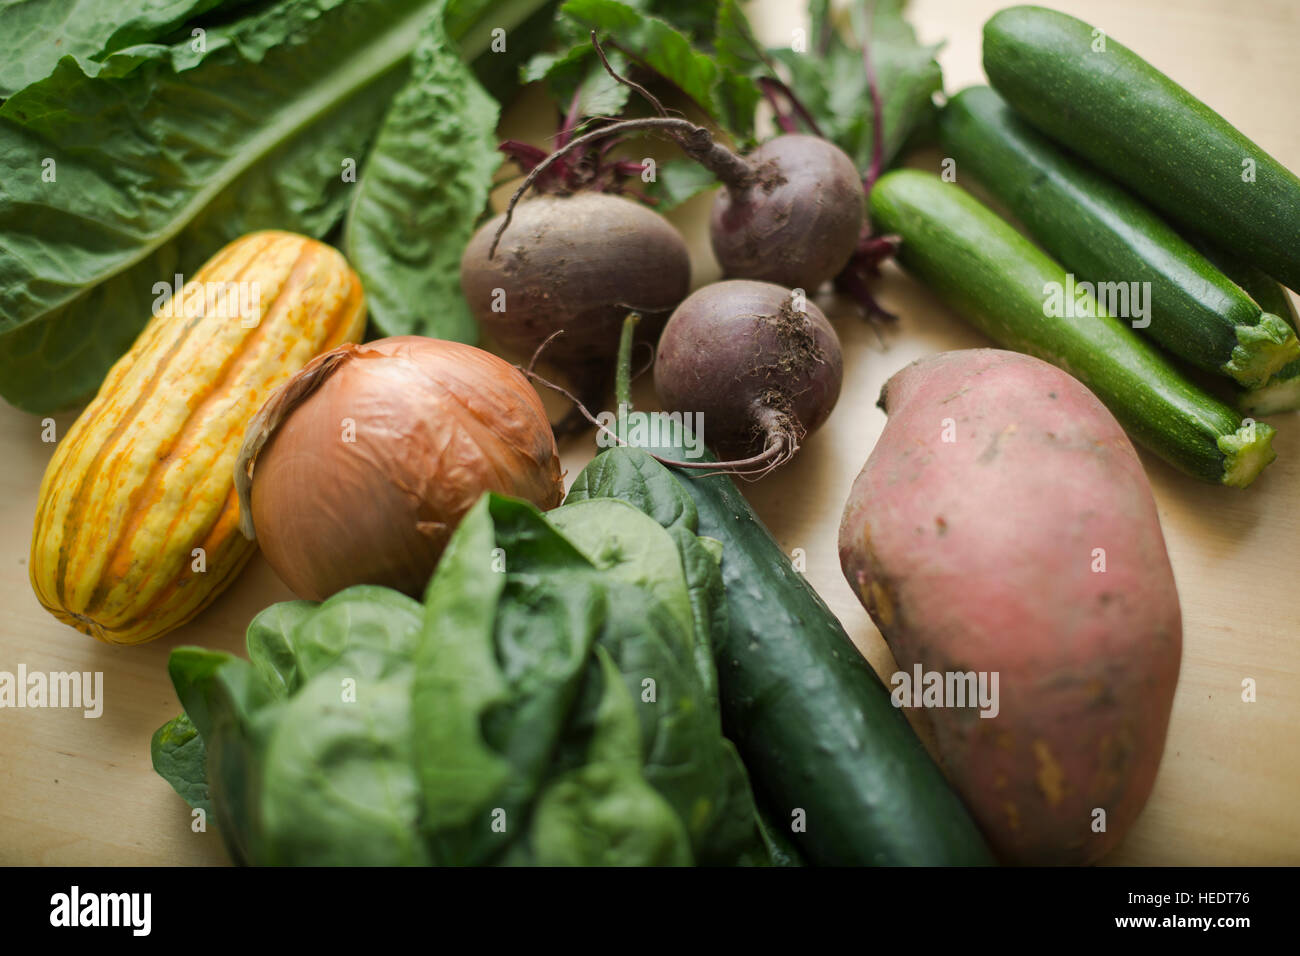 a variety of organic vegetables Stock Photo